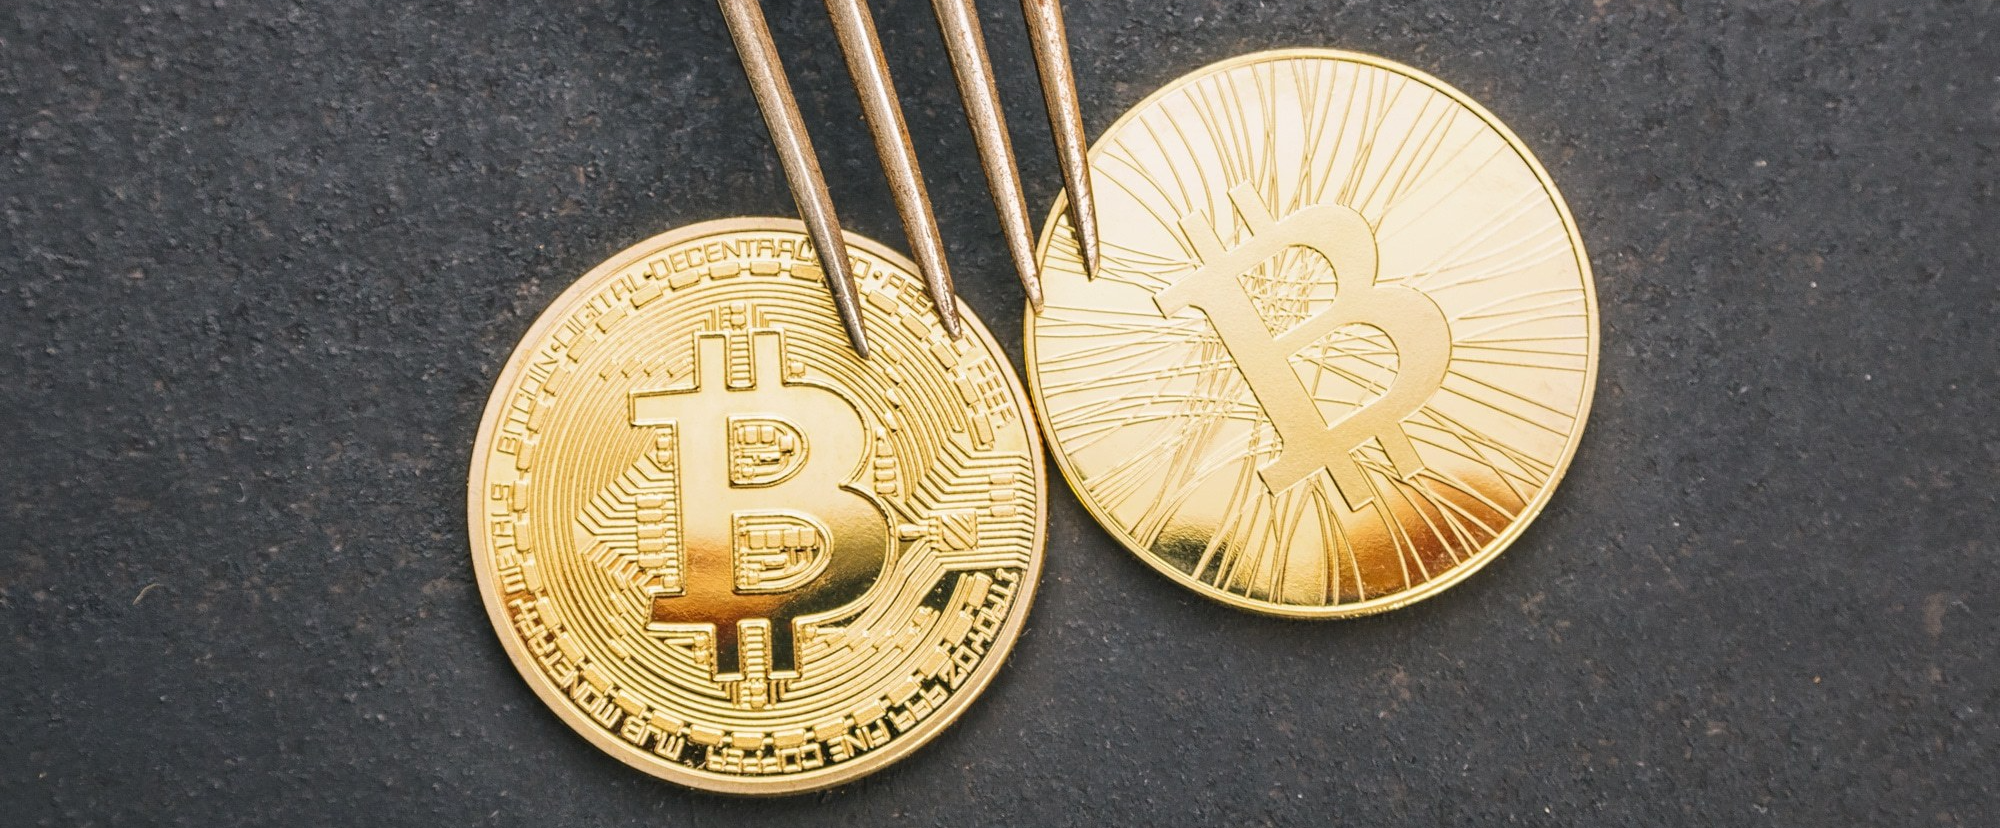 Bitcoin fork: reasons, pros and cons